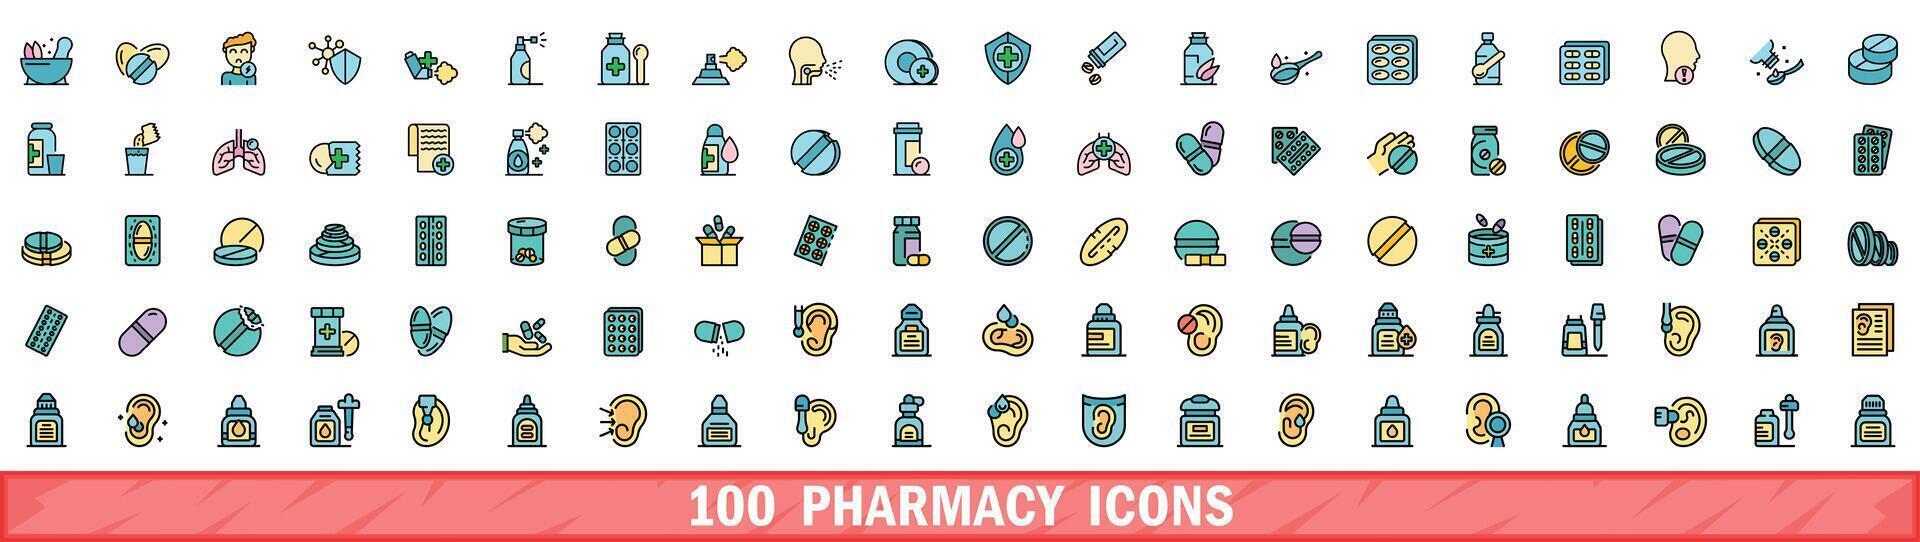 100 pharmacy icons set, color line style vector